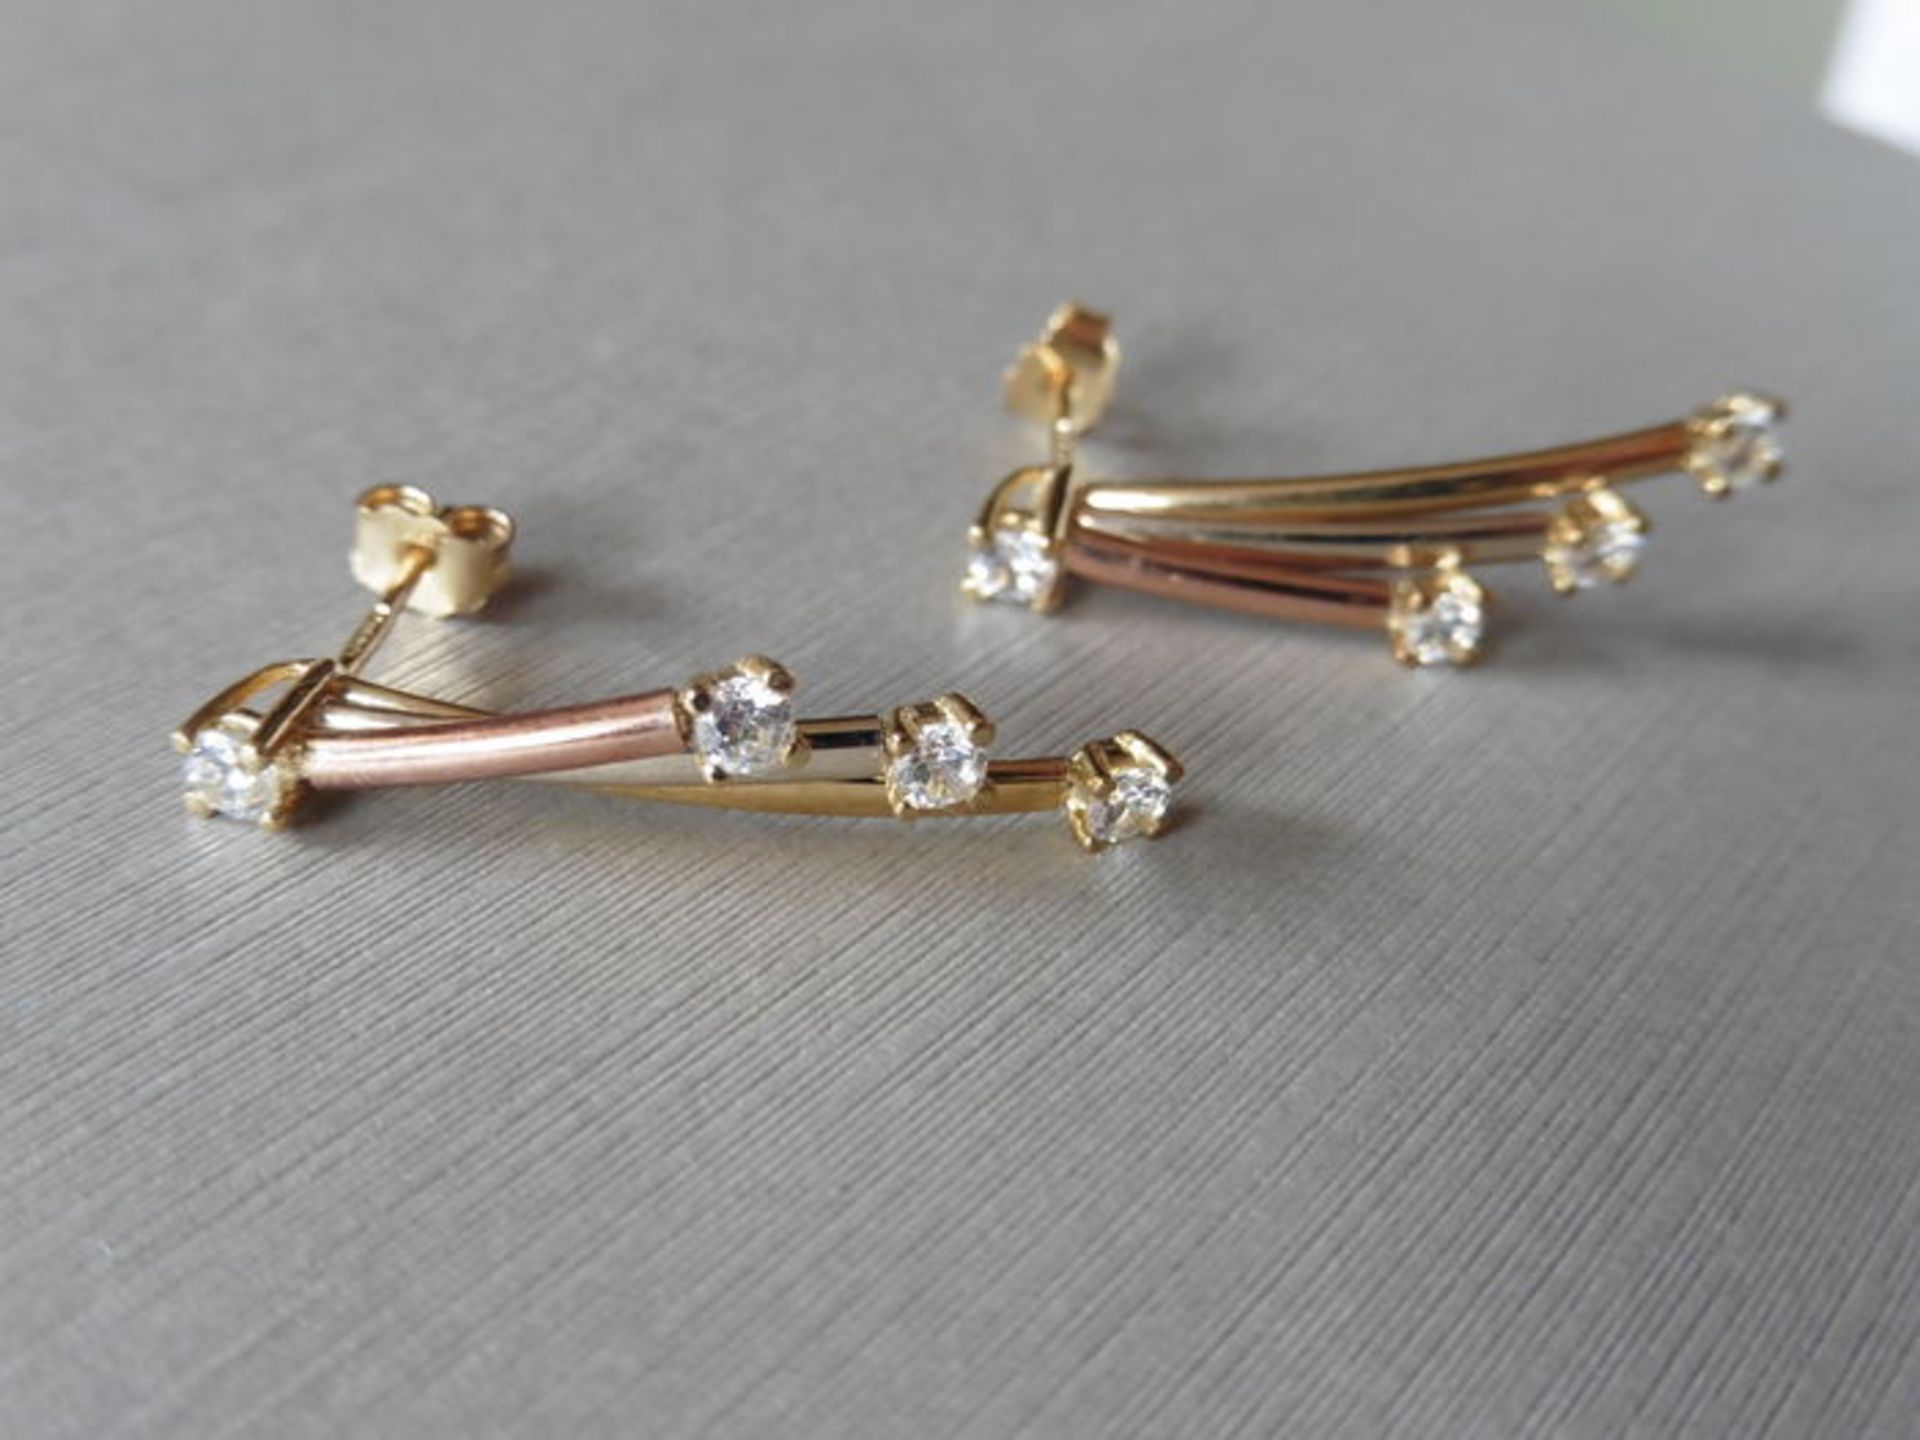 9ct gold diamond set drop style earrings. Set with white, rose and yellow gold bars with a small - Image 4 of 5